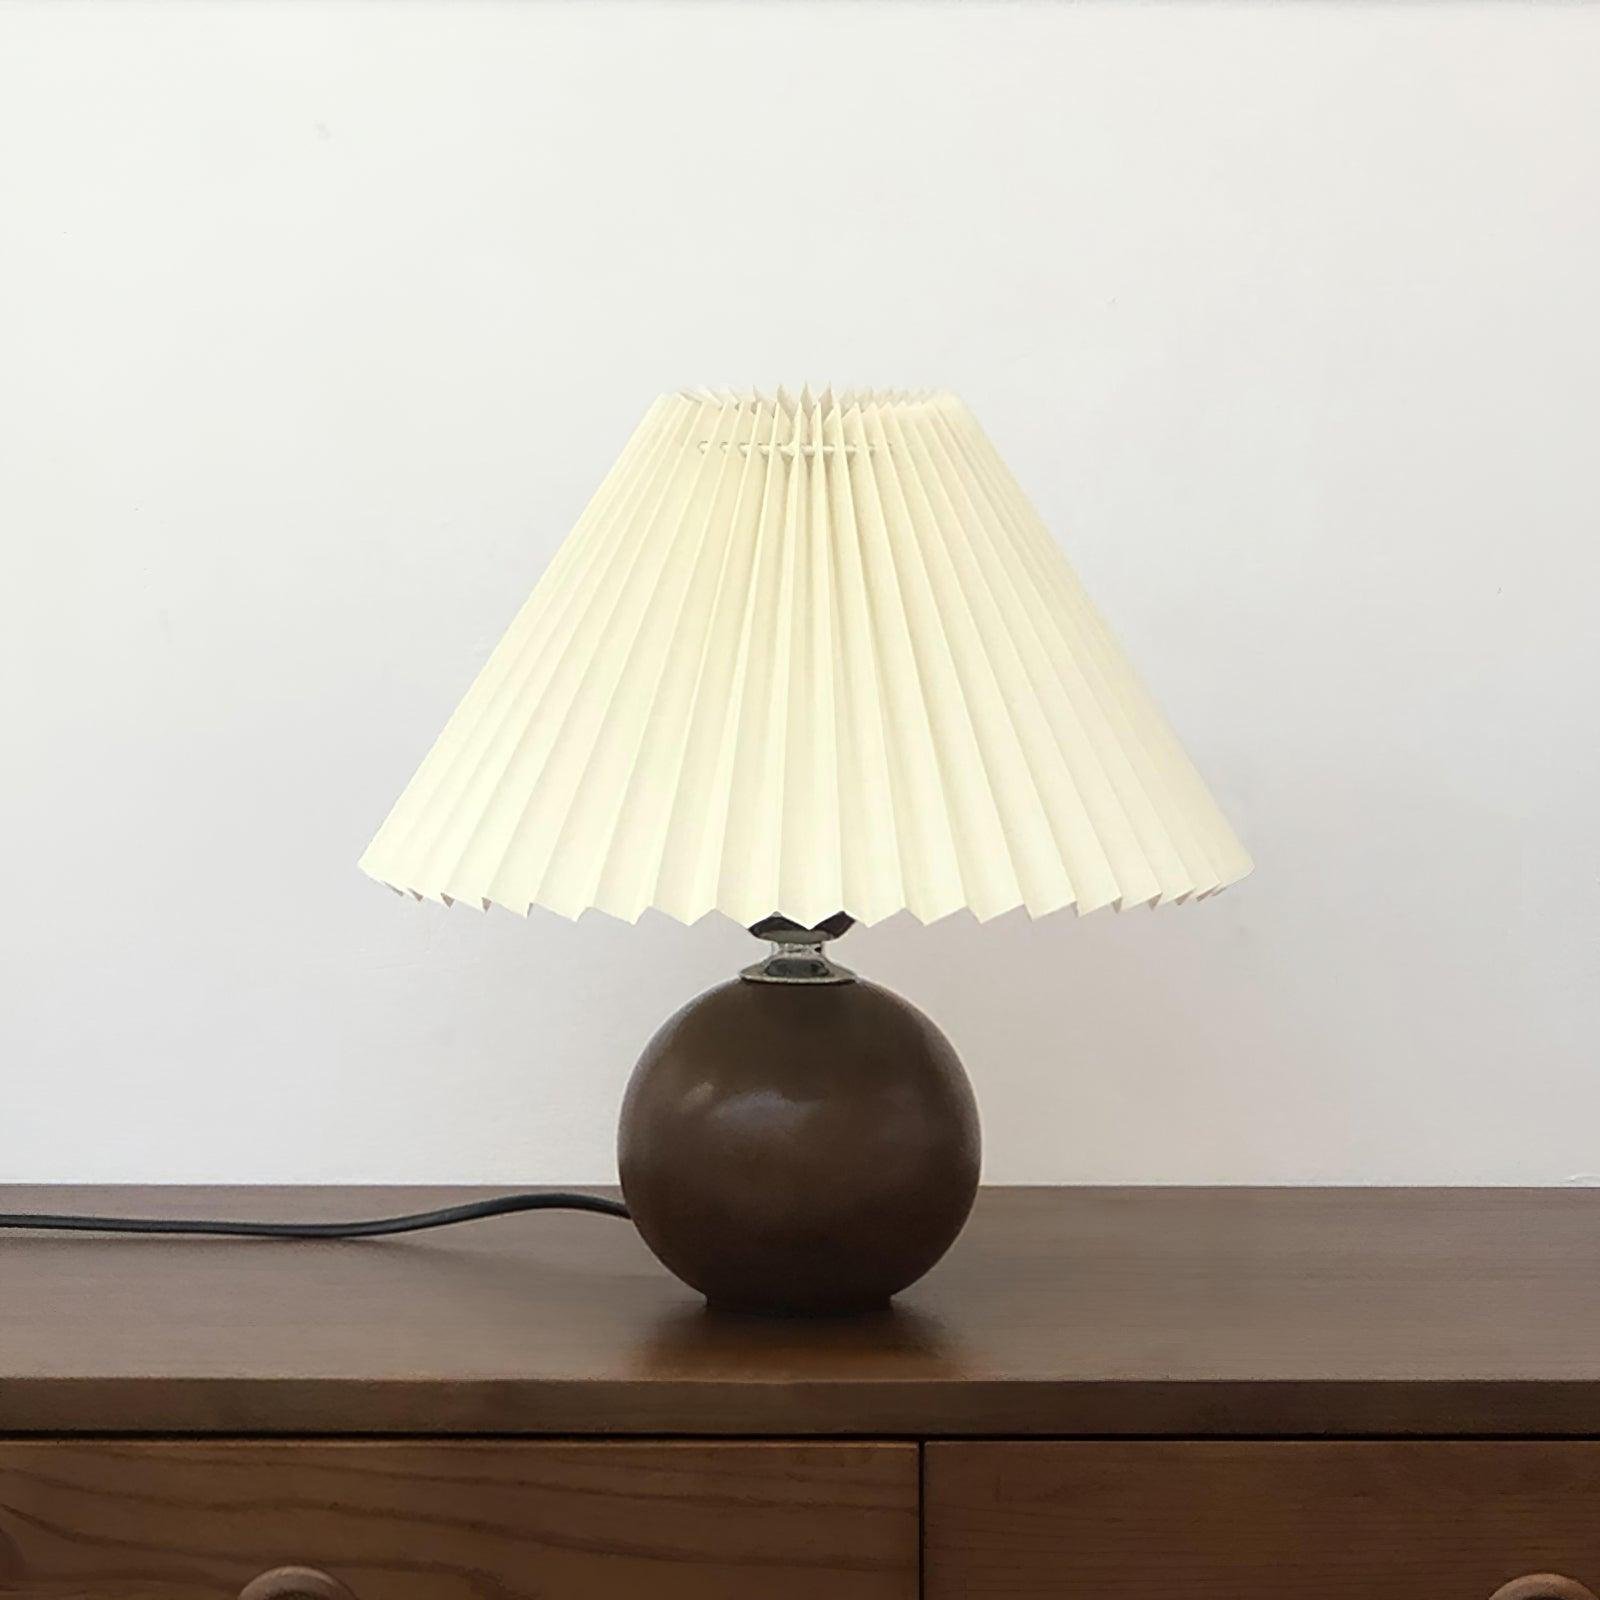 Walnut and Beige Wooden Pleated Table Lamp (UK Plug) with a diameter of 11 inches and a height of 11.8 inches (28cm x 30cm)